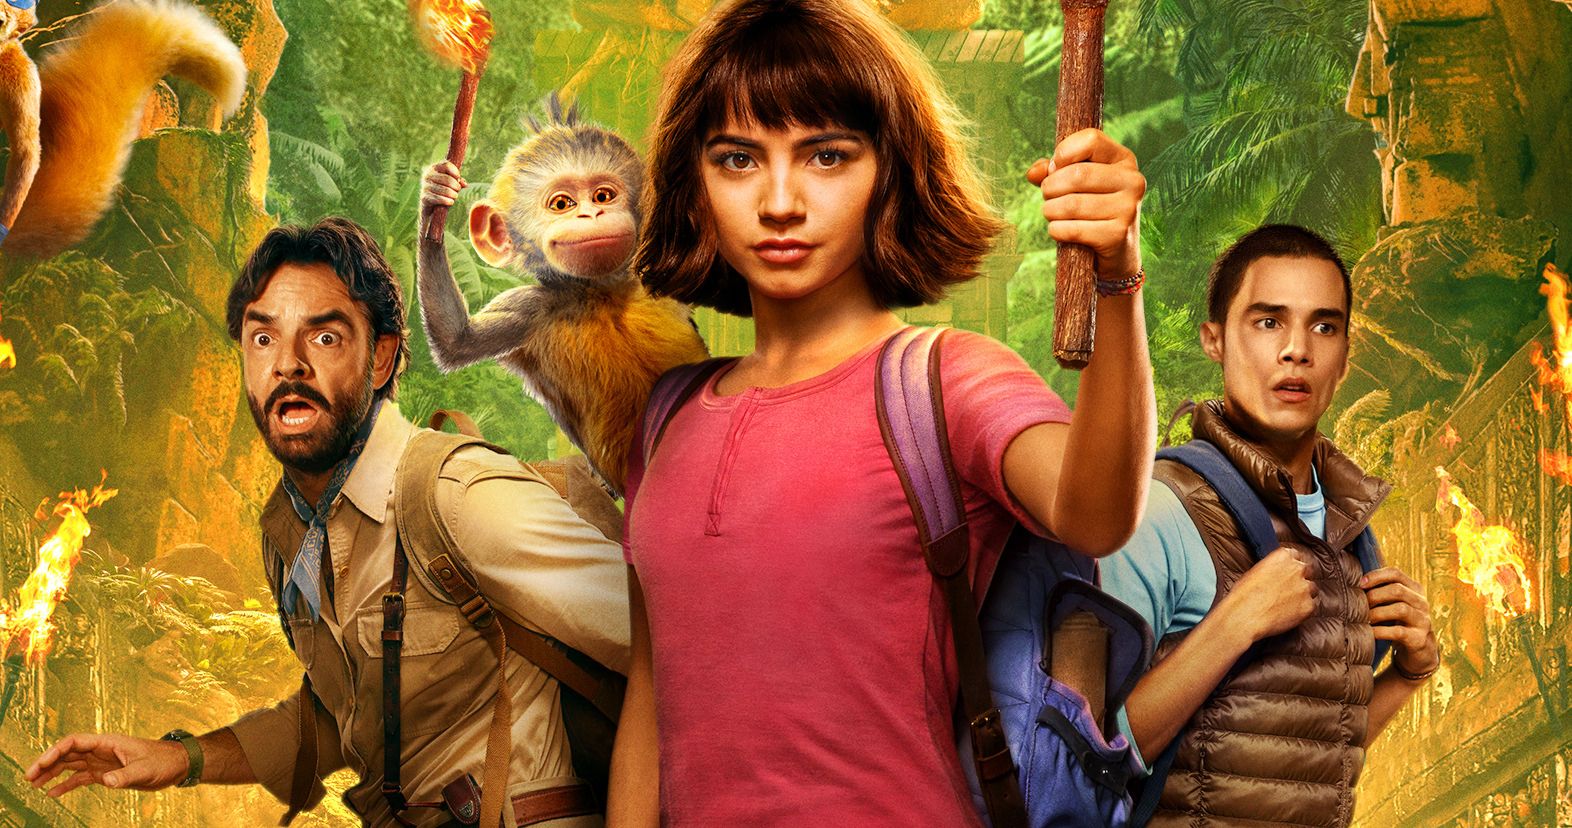 Dora and the Lost City of Gold Trailer #2 Goes Exploring for the Ultimate Treasure